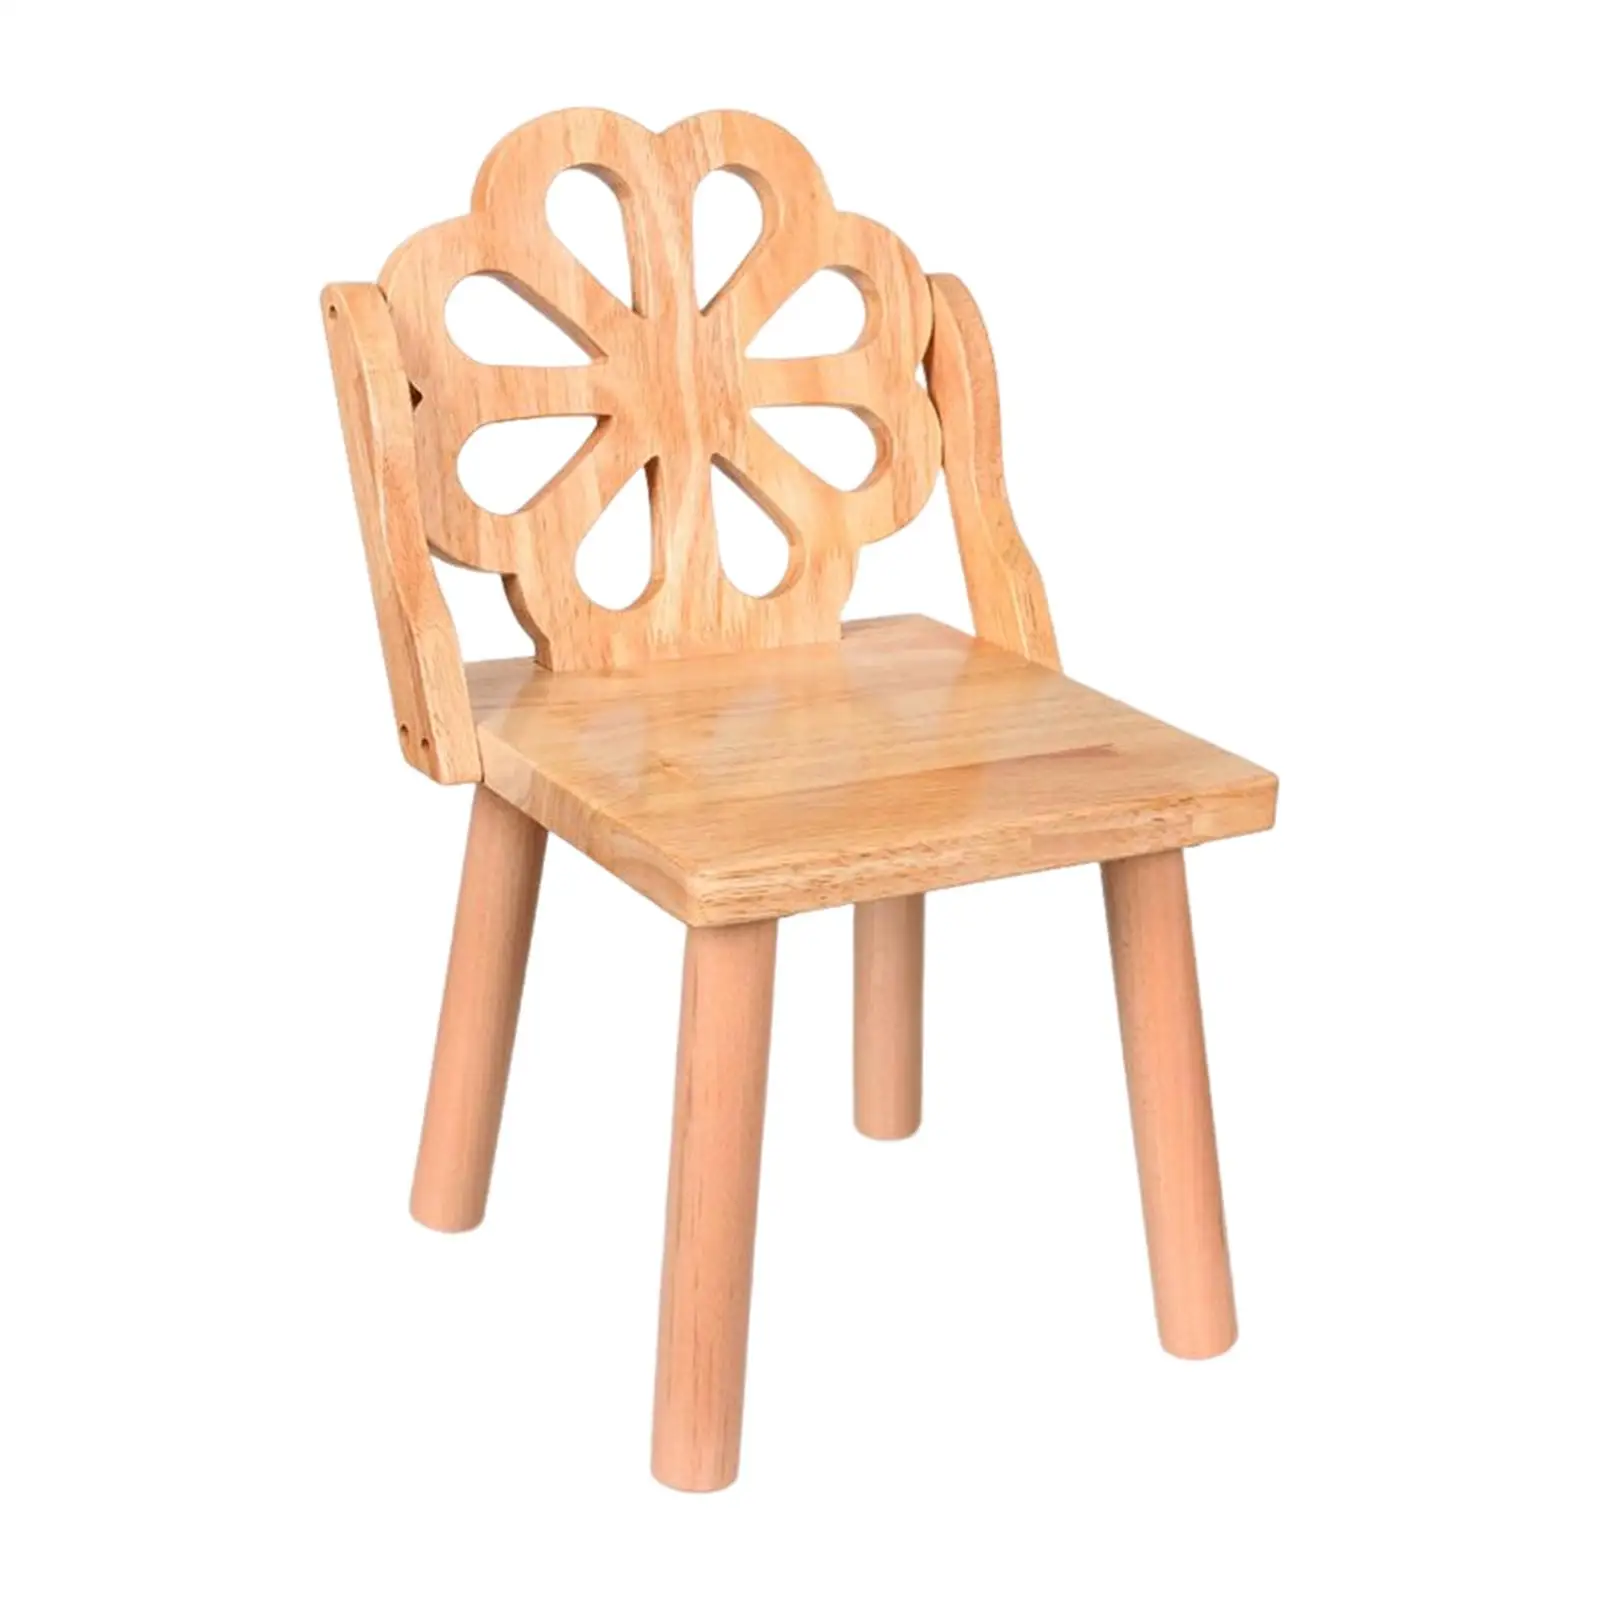 Household Removable Wooden Child Stool Lightweight Wooden for Nursery